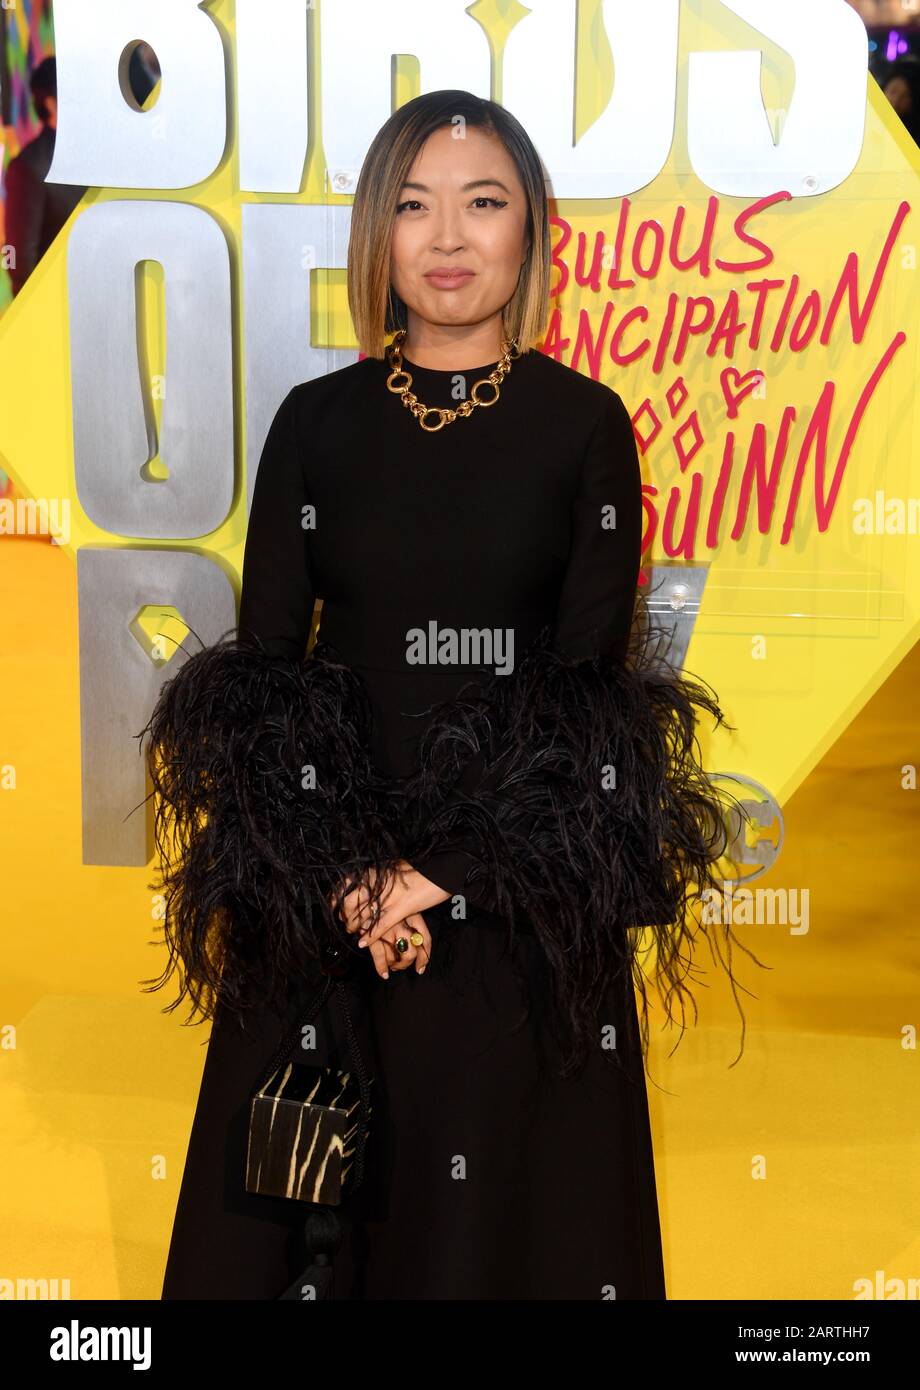 Director Cathy Yan attending the world premiere of Birds of Prey and the Fantabulous Emancipation of One Harley Quinn, held at the BFI IMAX, London. Stock Photo